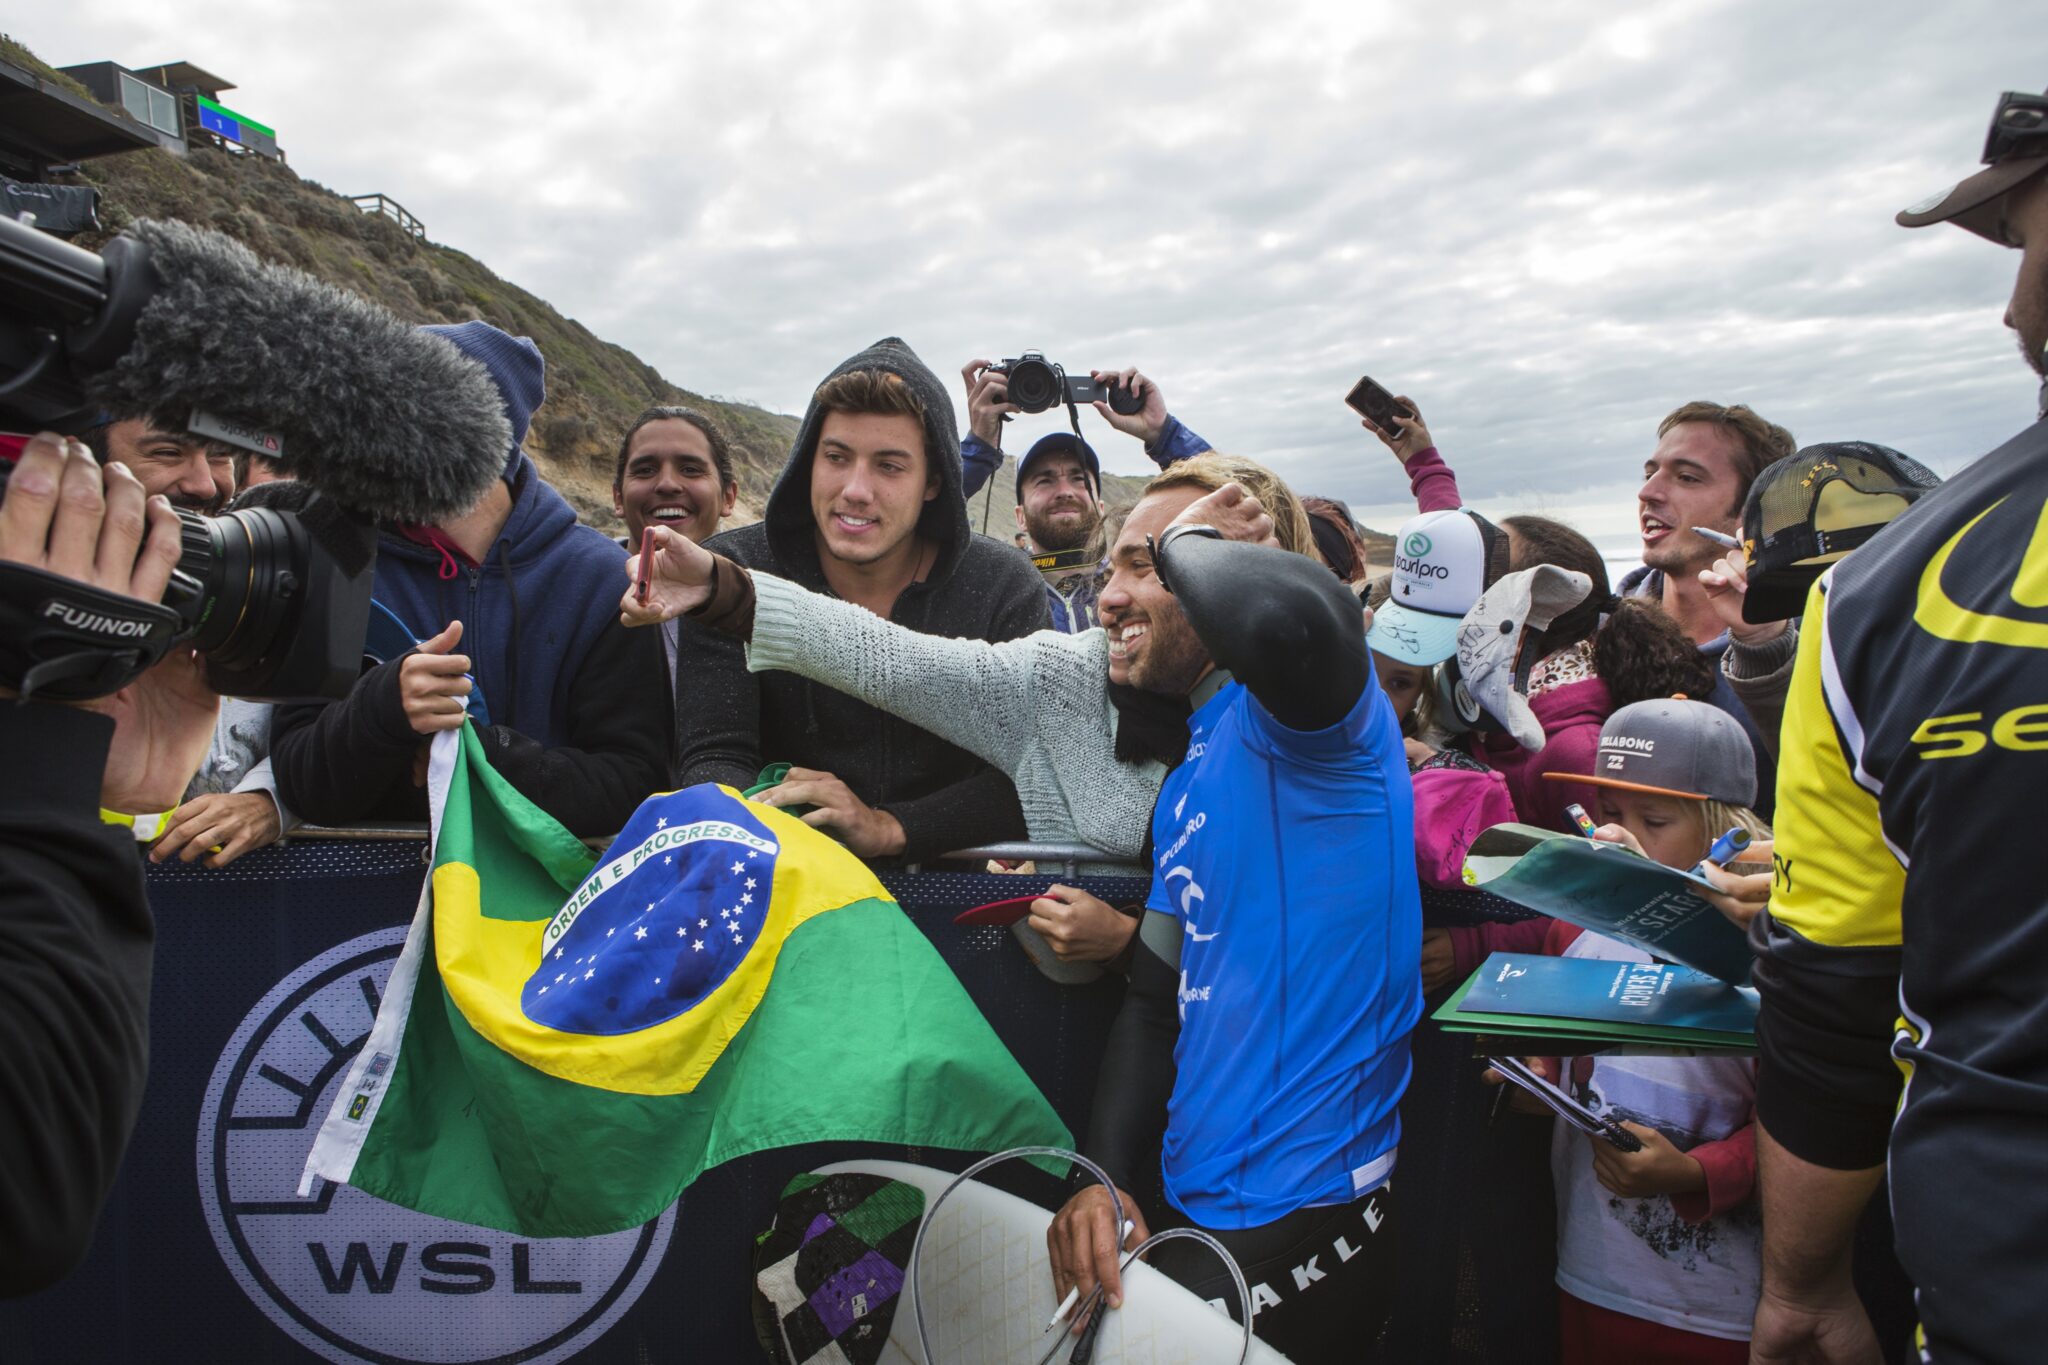 Caio Ibelli celebrating his win over John John Florence with his fans.